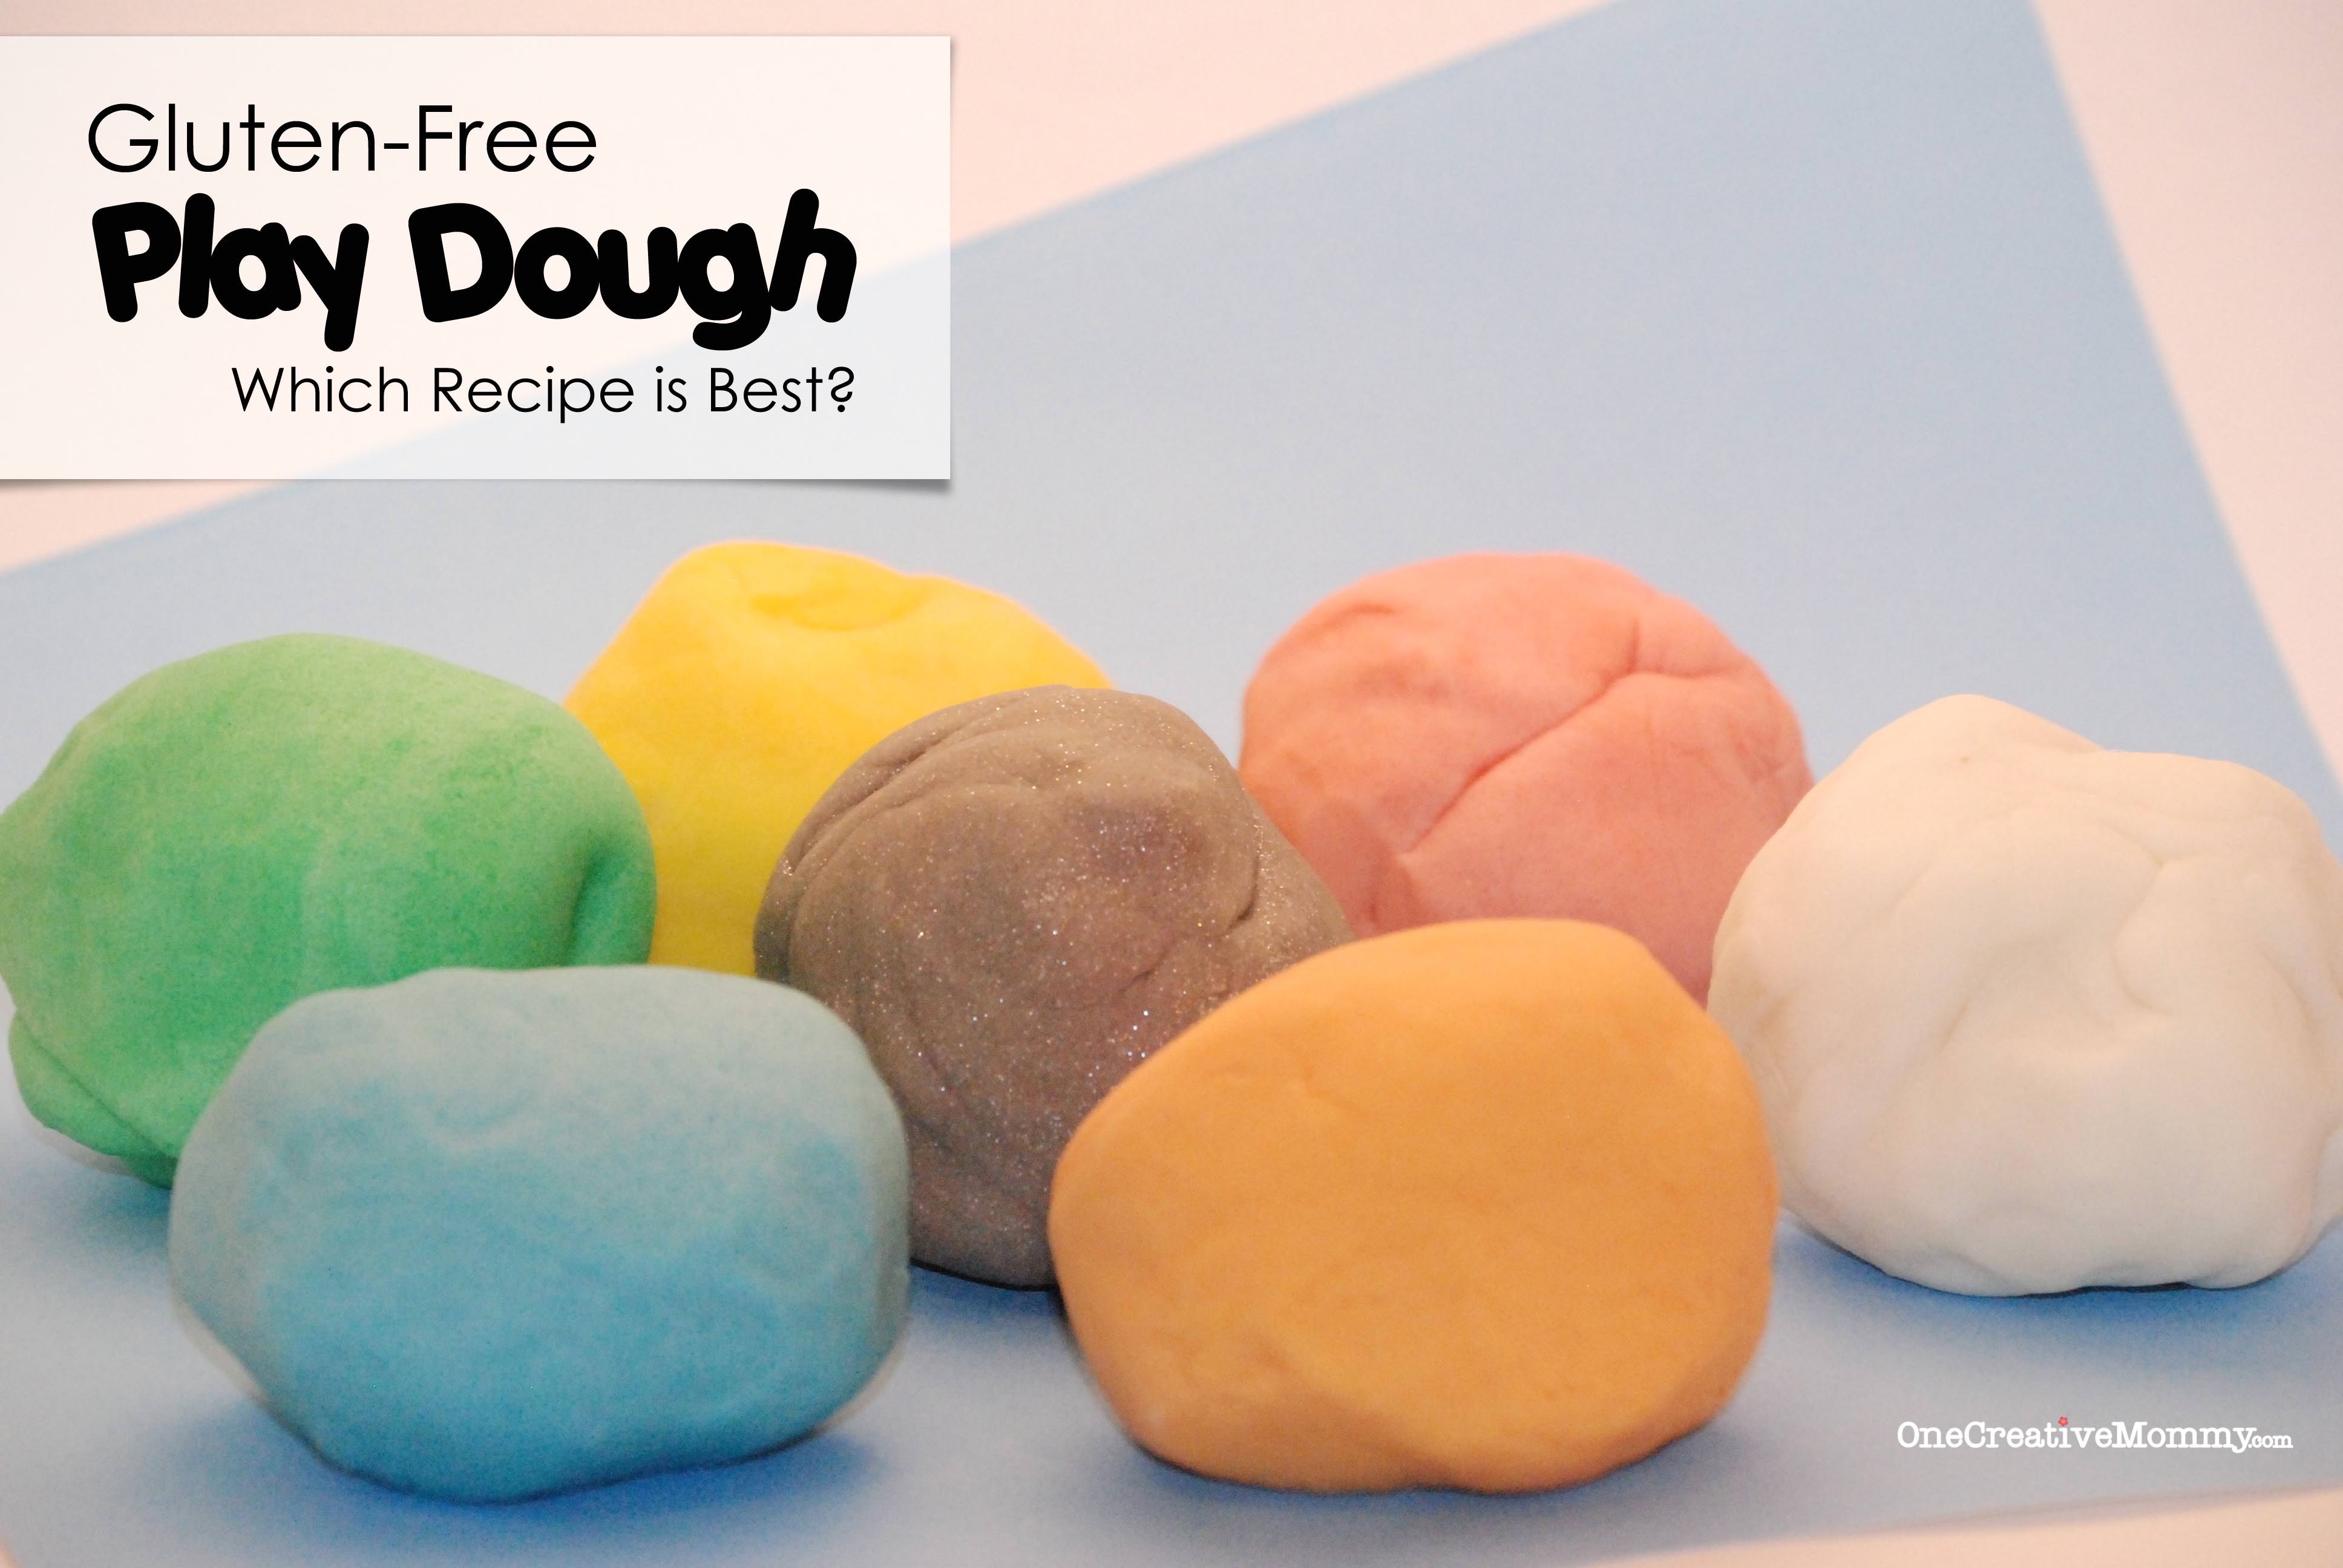 Gluten-Free Play Dough Recipe Review and Tips from OneCreativeMommy.com -- I tried three recipes to see which was the best! #glutenfree #playdough